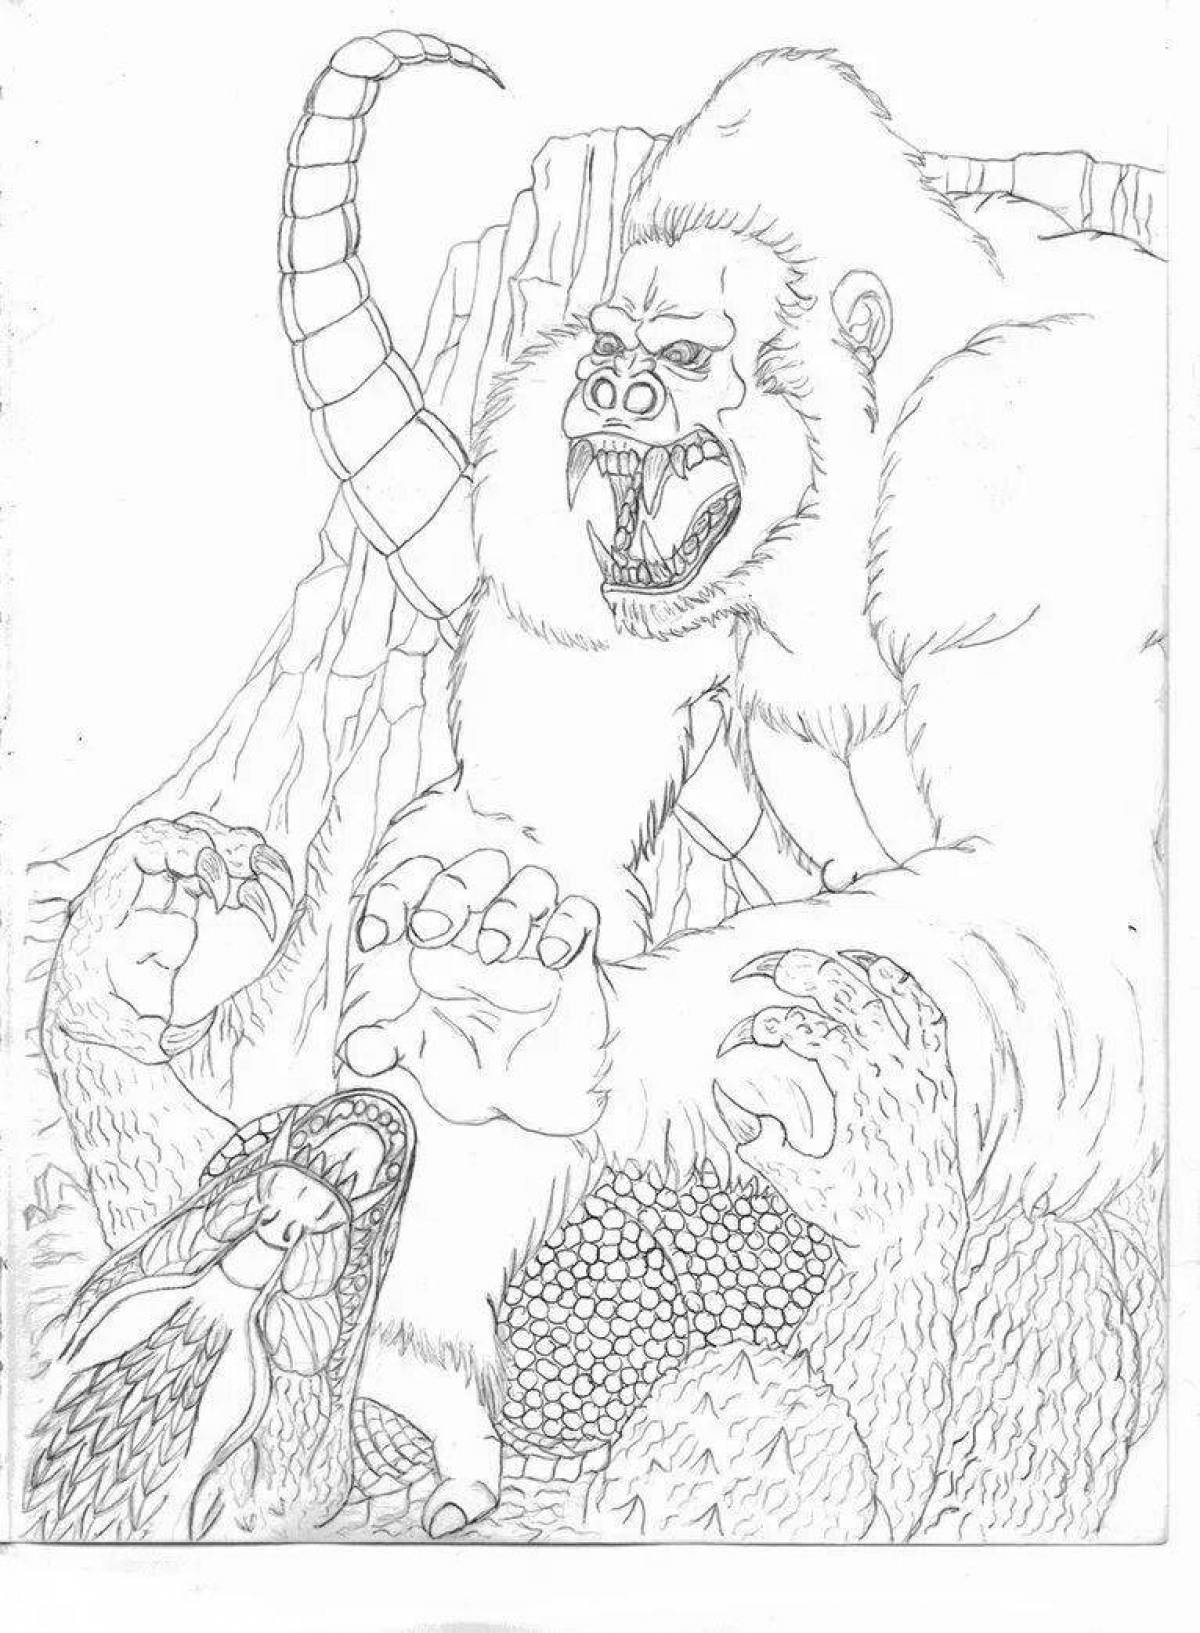 Creative king kong coloring book for kids